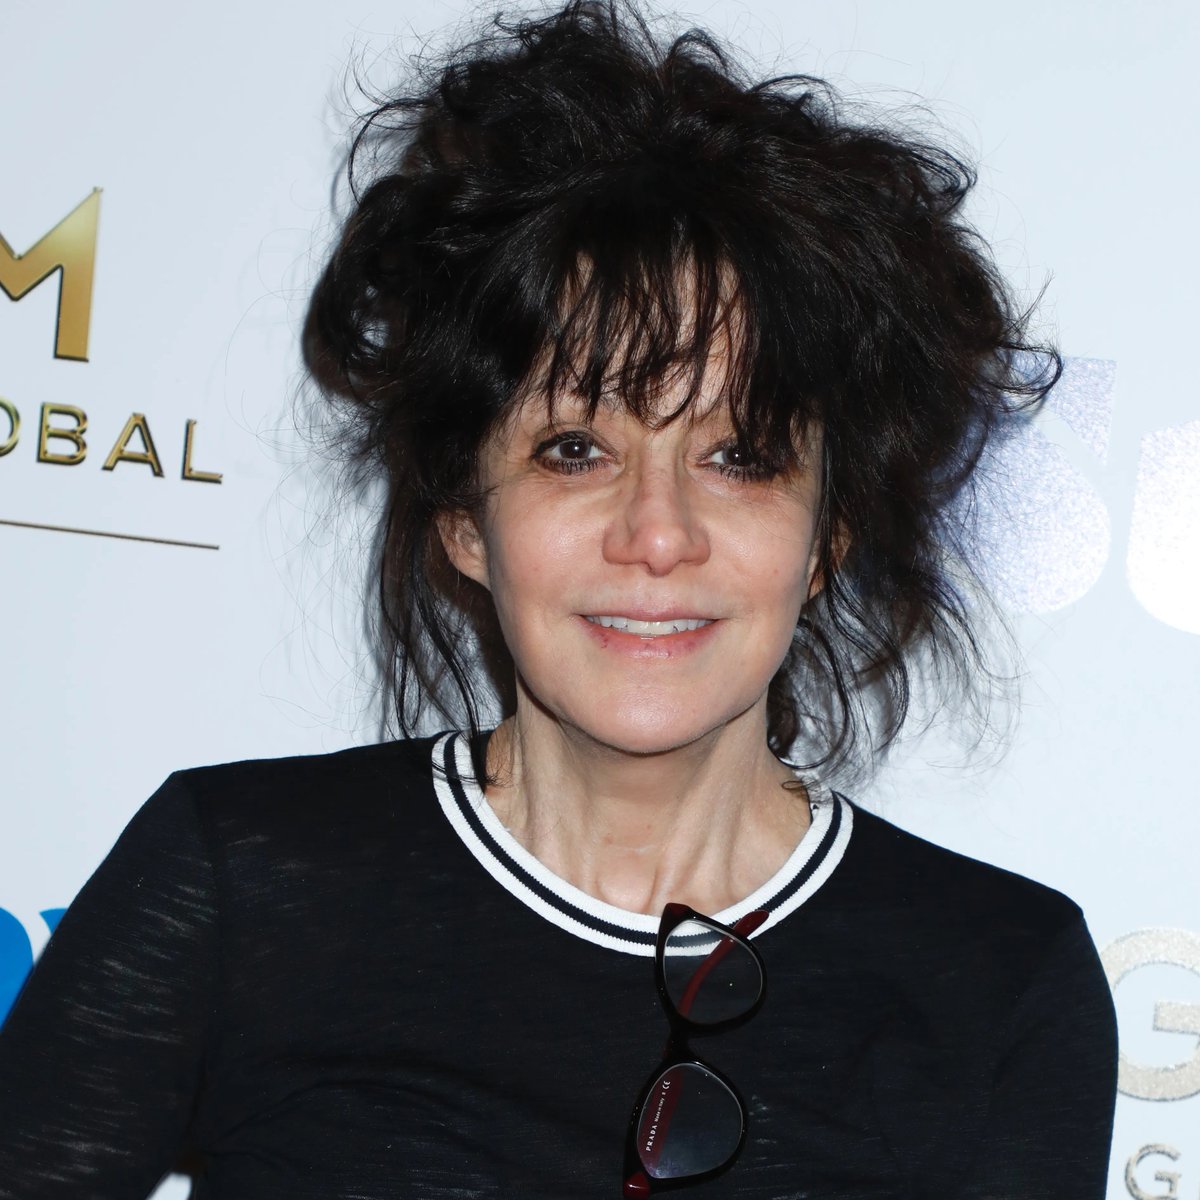 May 7 Team #GGACP wishes a happy birthday to podcast guest @amyheckerling! @Franksantopadre @RealGilbert